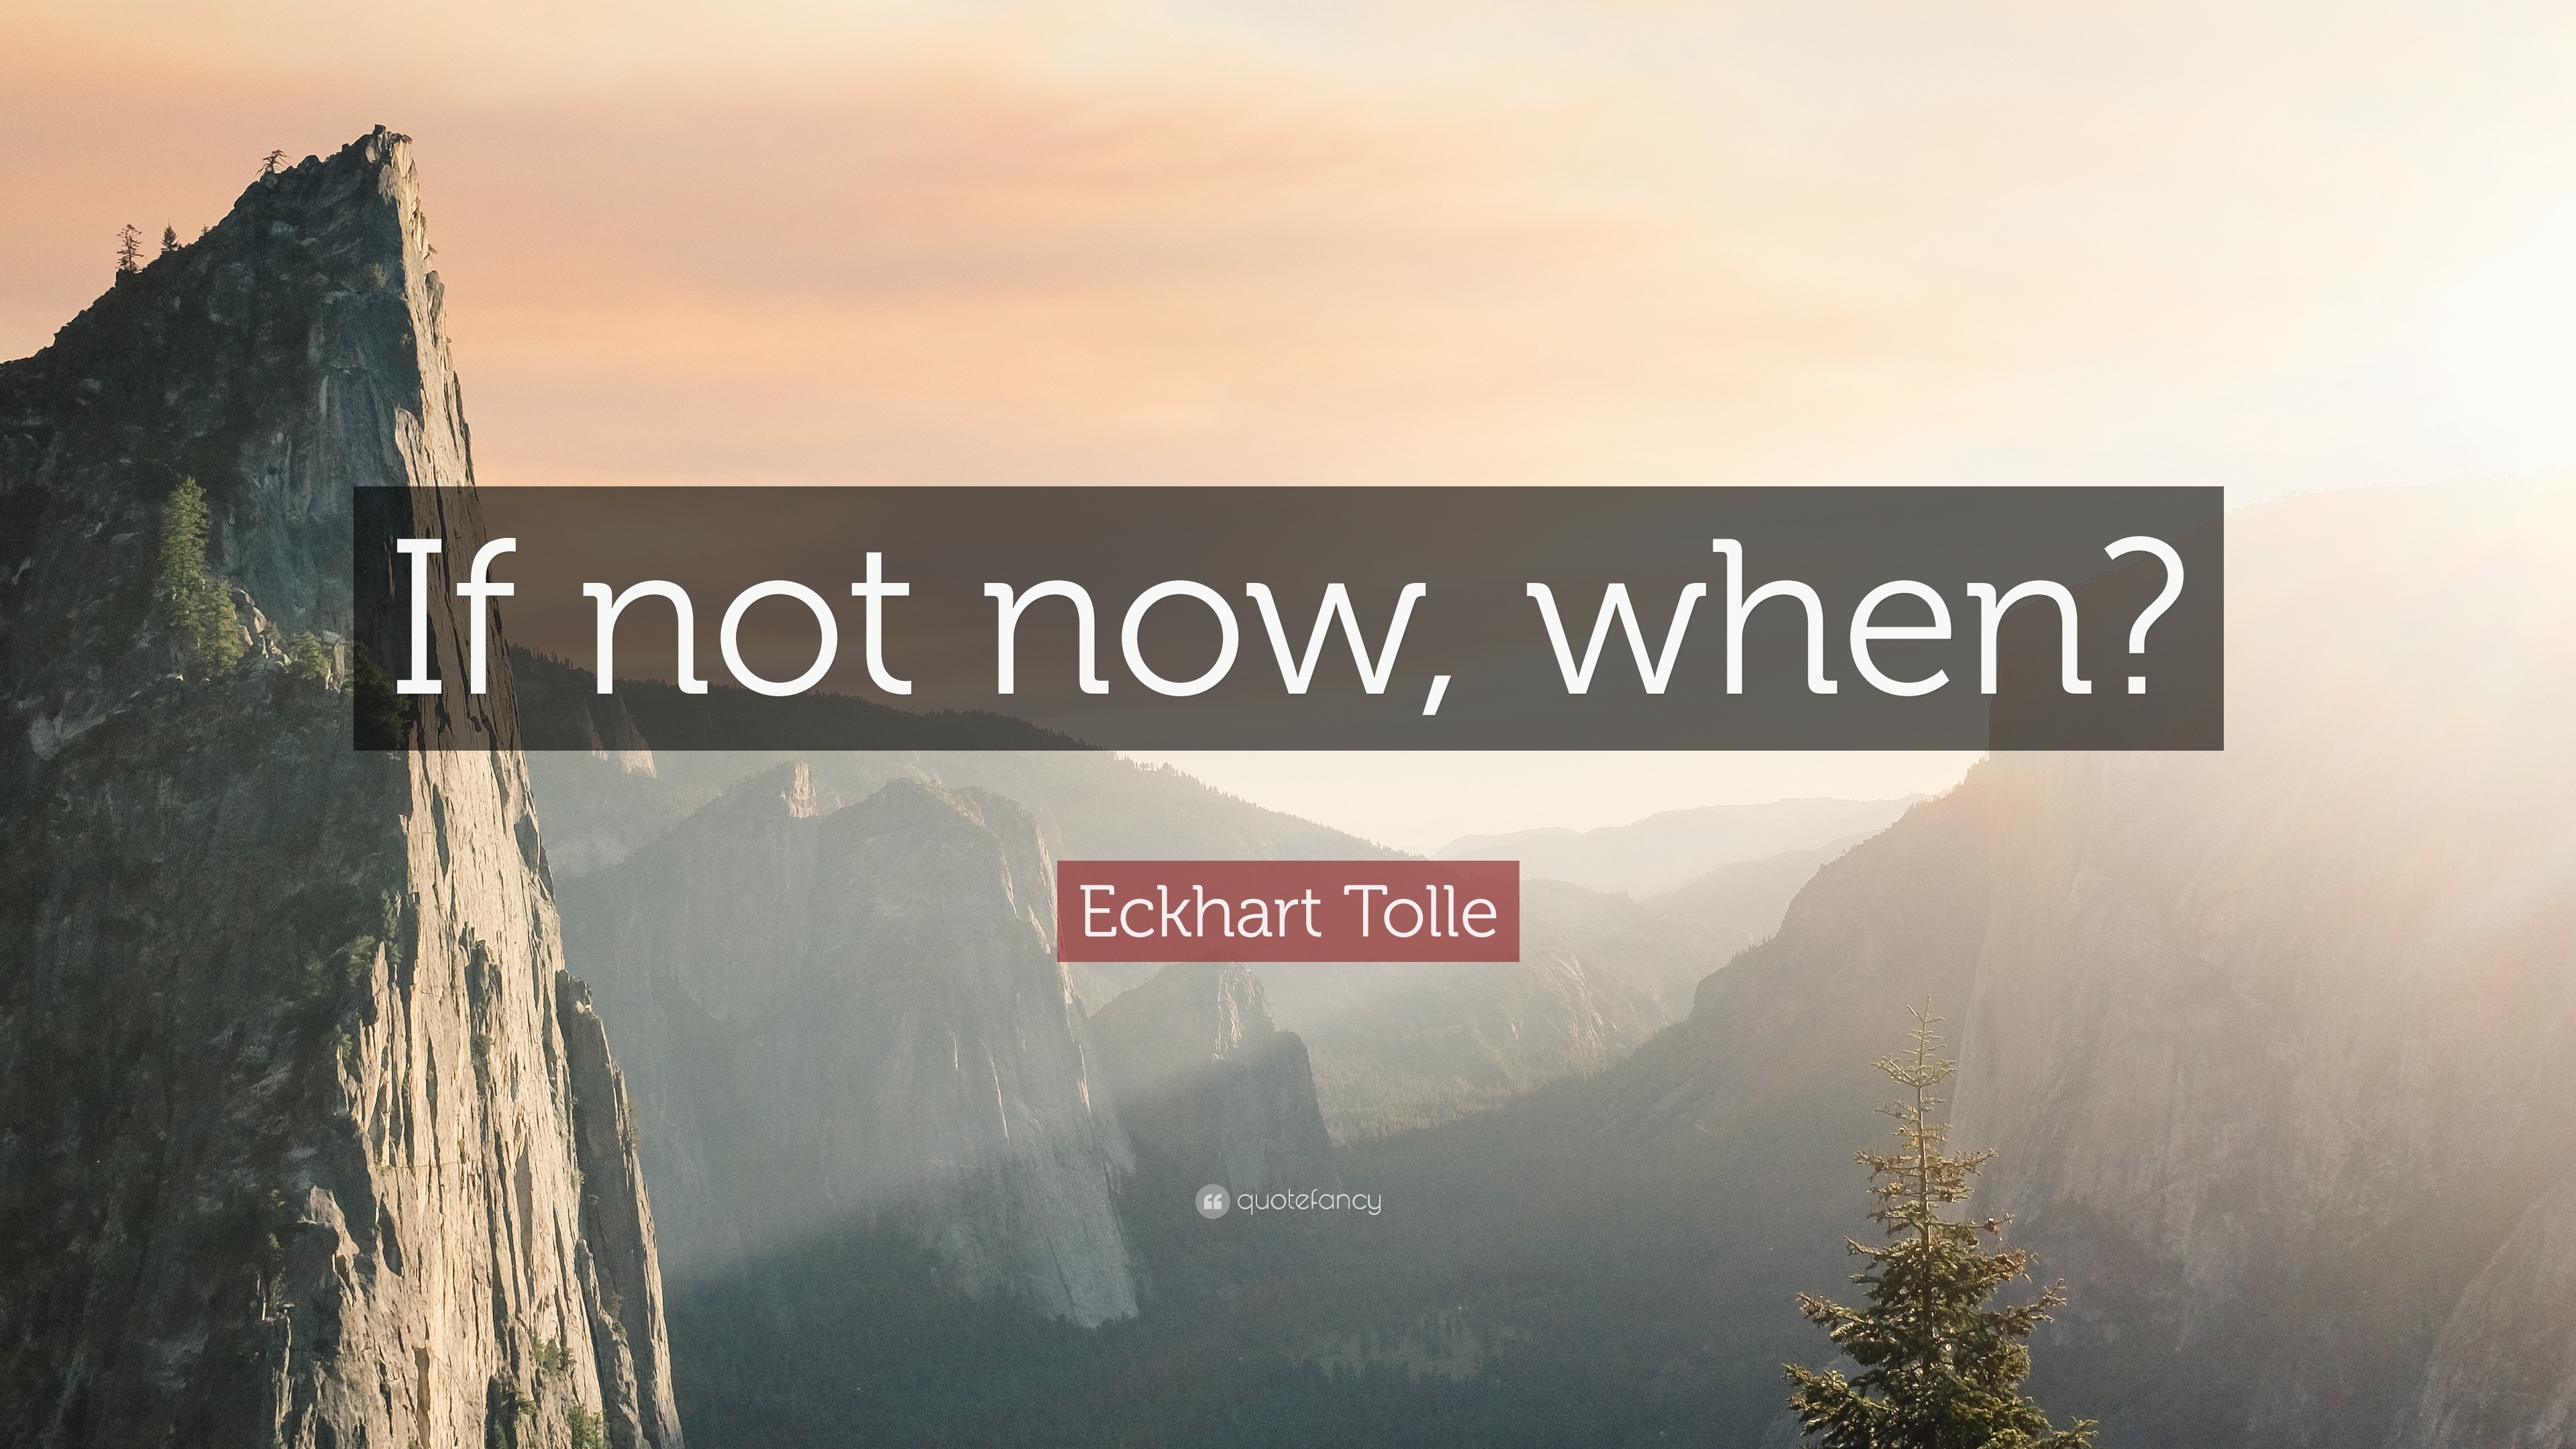 eckhart tolle now knotes